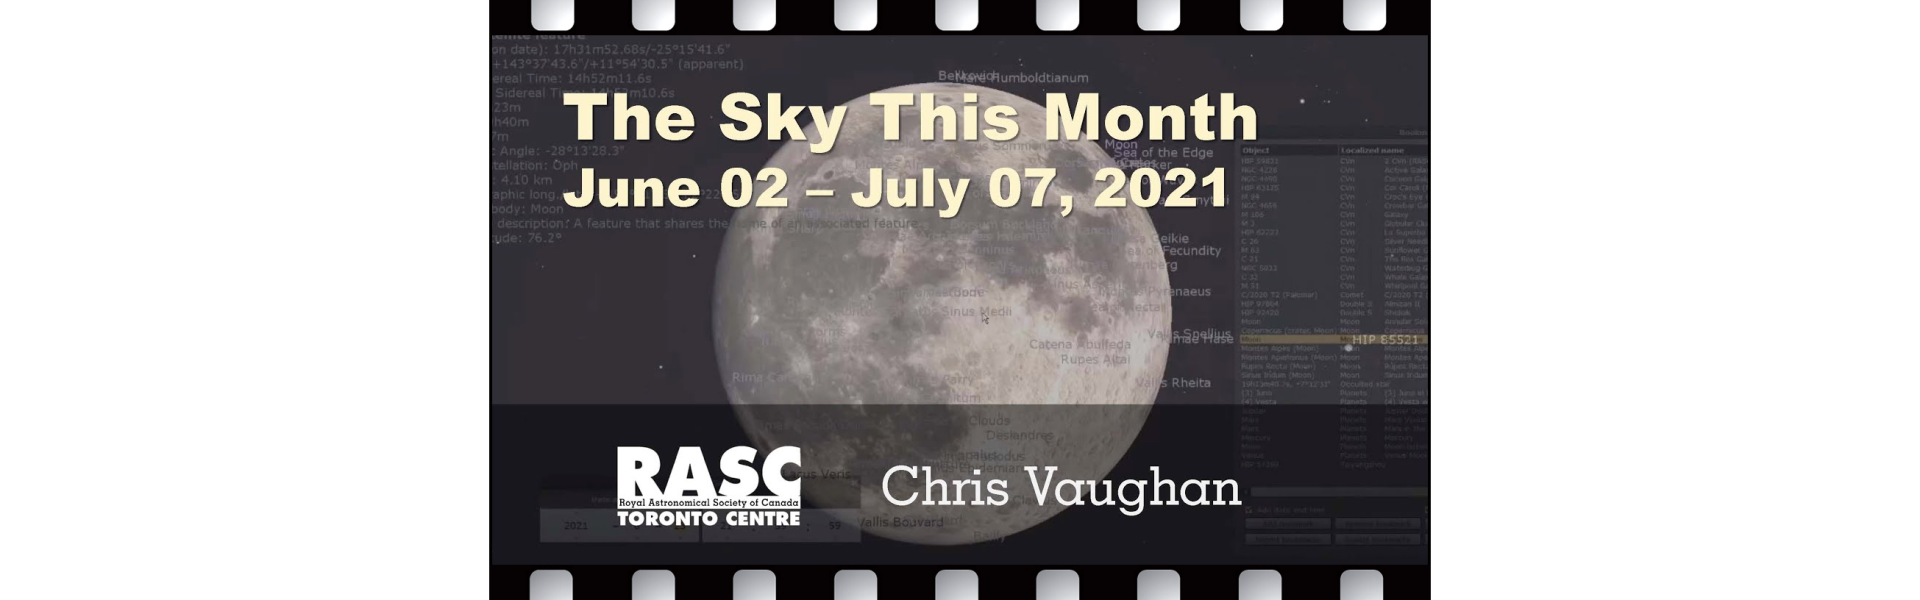 The Sky This Month for June 2 - July 7, 2021